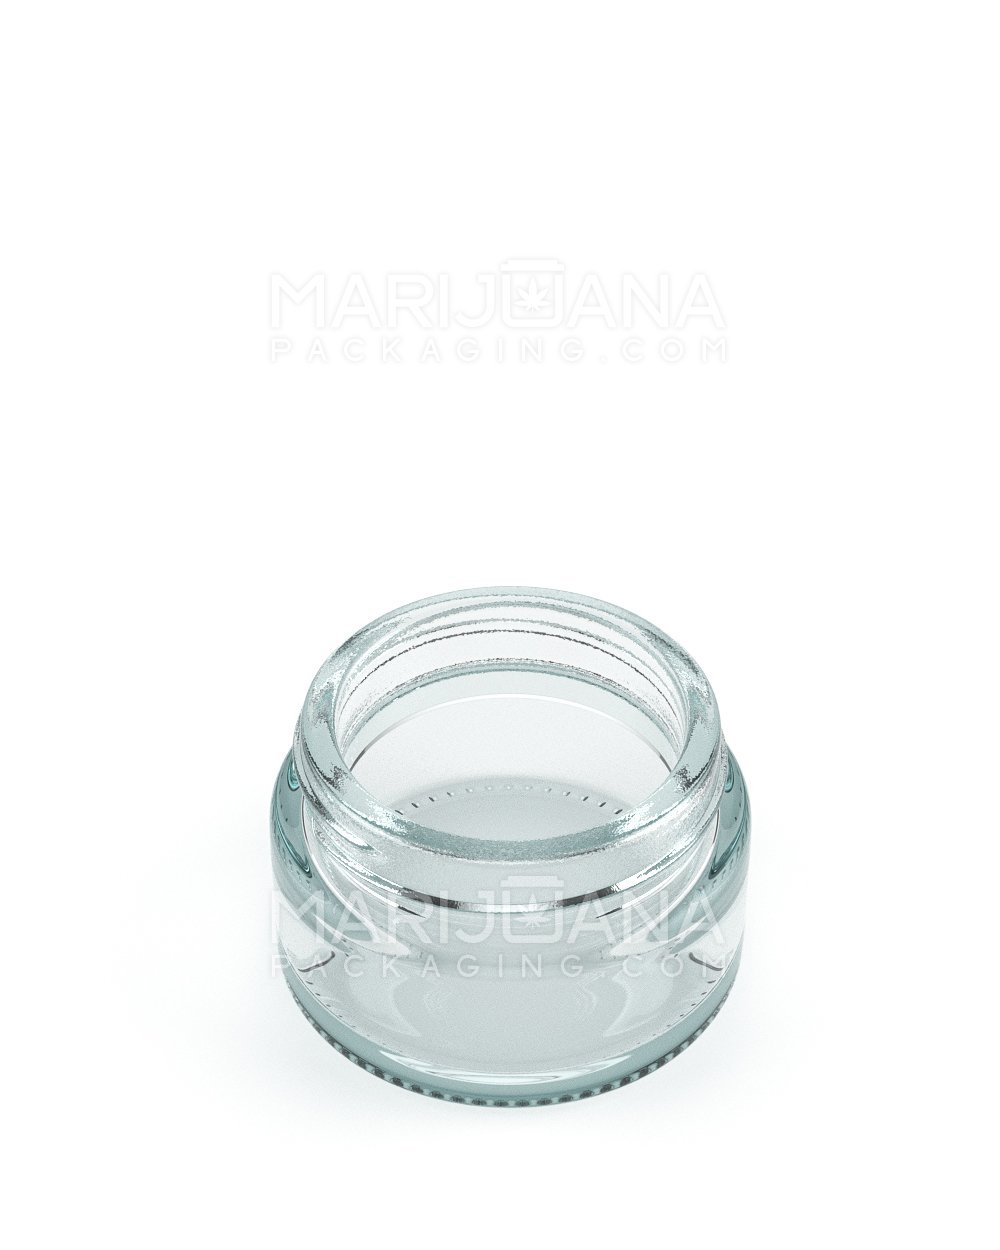 Straight Sided Clear Glass Jars | 50mm - 1oz - 200 Count - 2